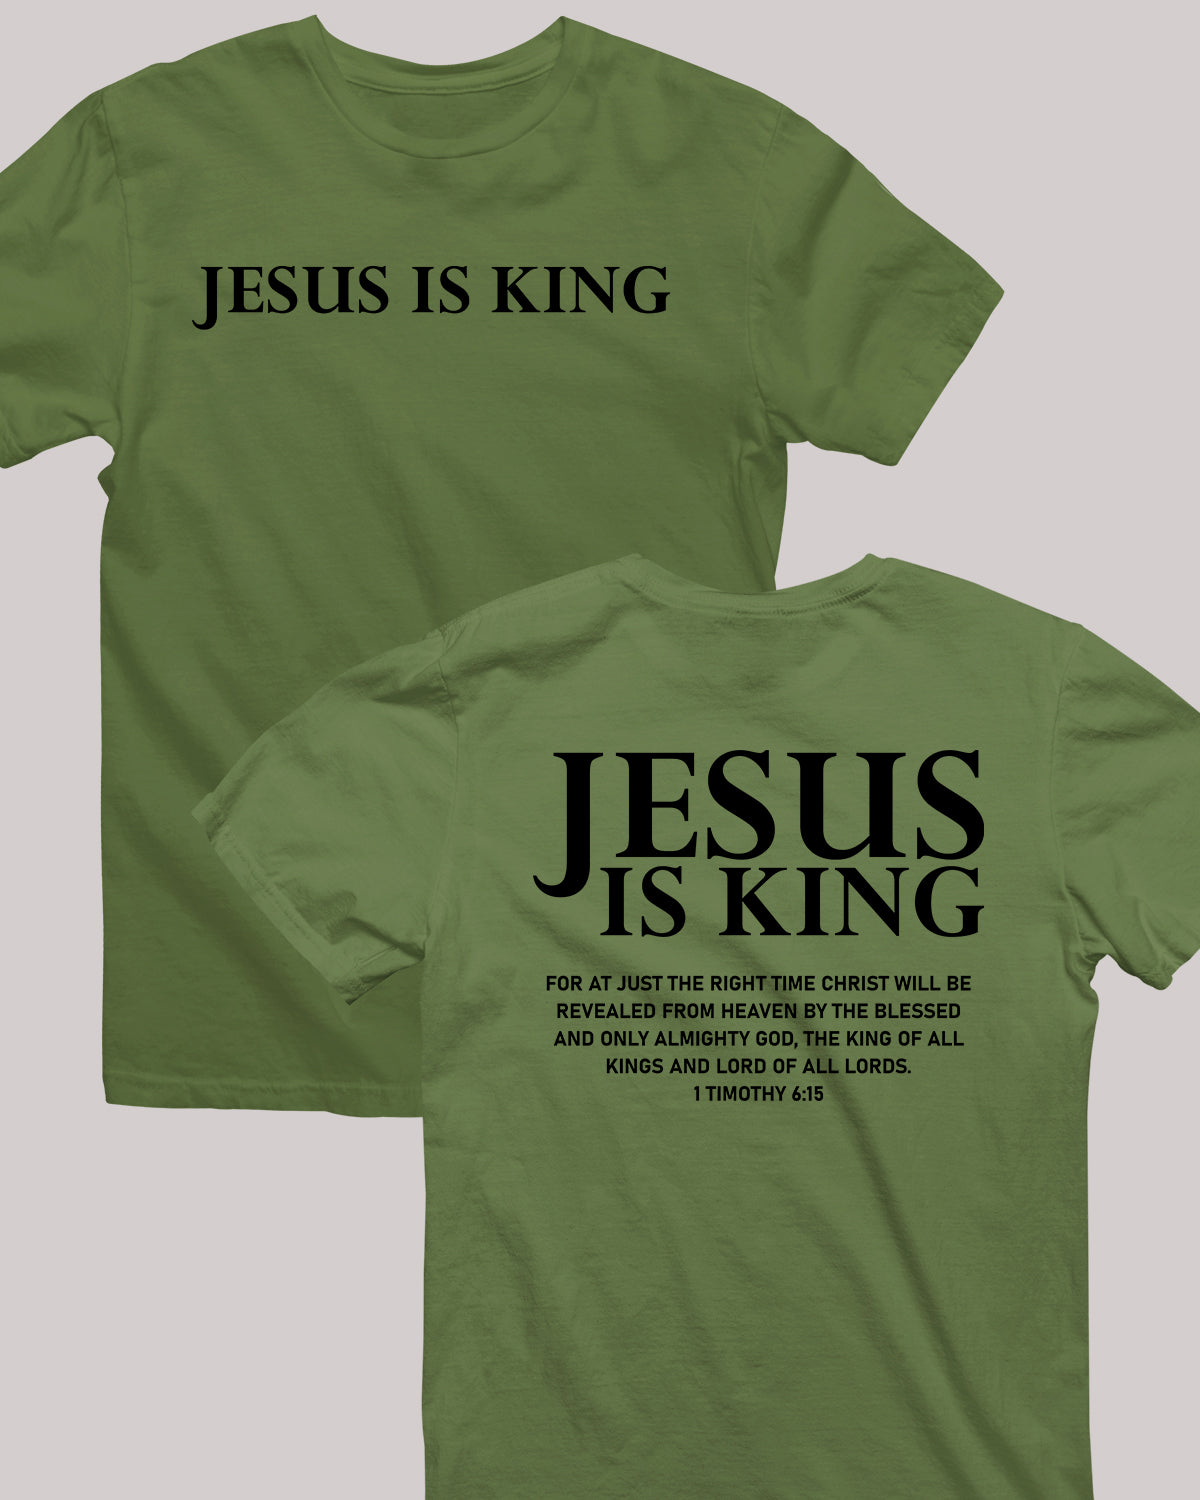 Jesus is king Christian merch Front Back T Shirts